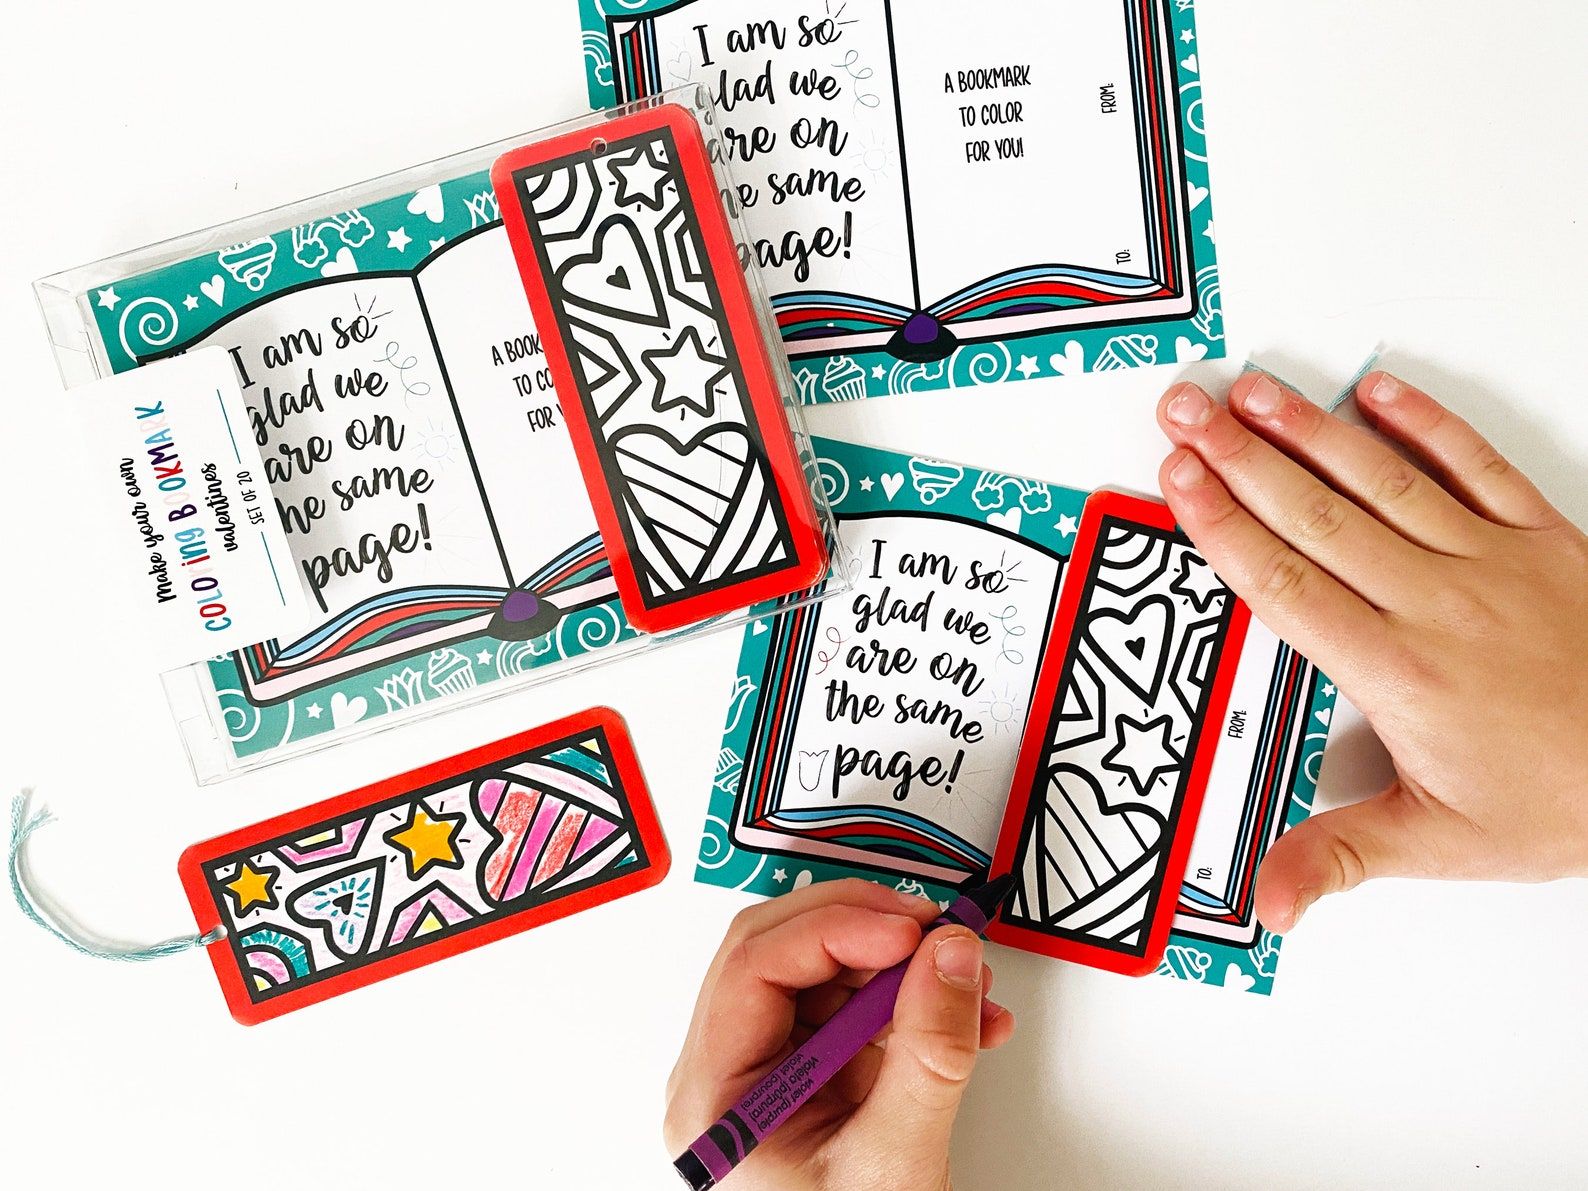 A teal, white, and red Valentine's Card that says "I am so glad we are on the same page" with a coloring bookmark attached